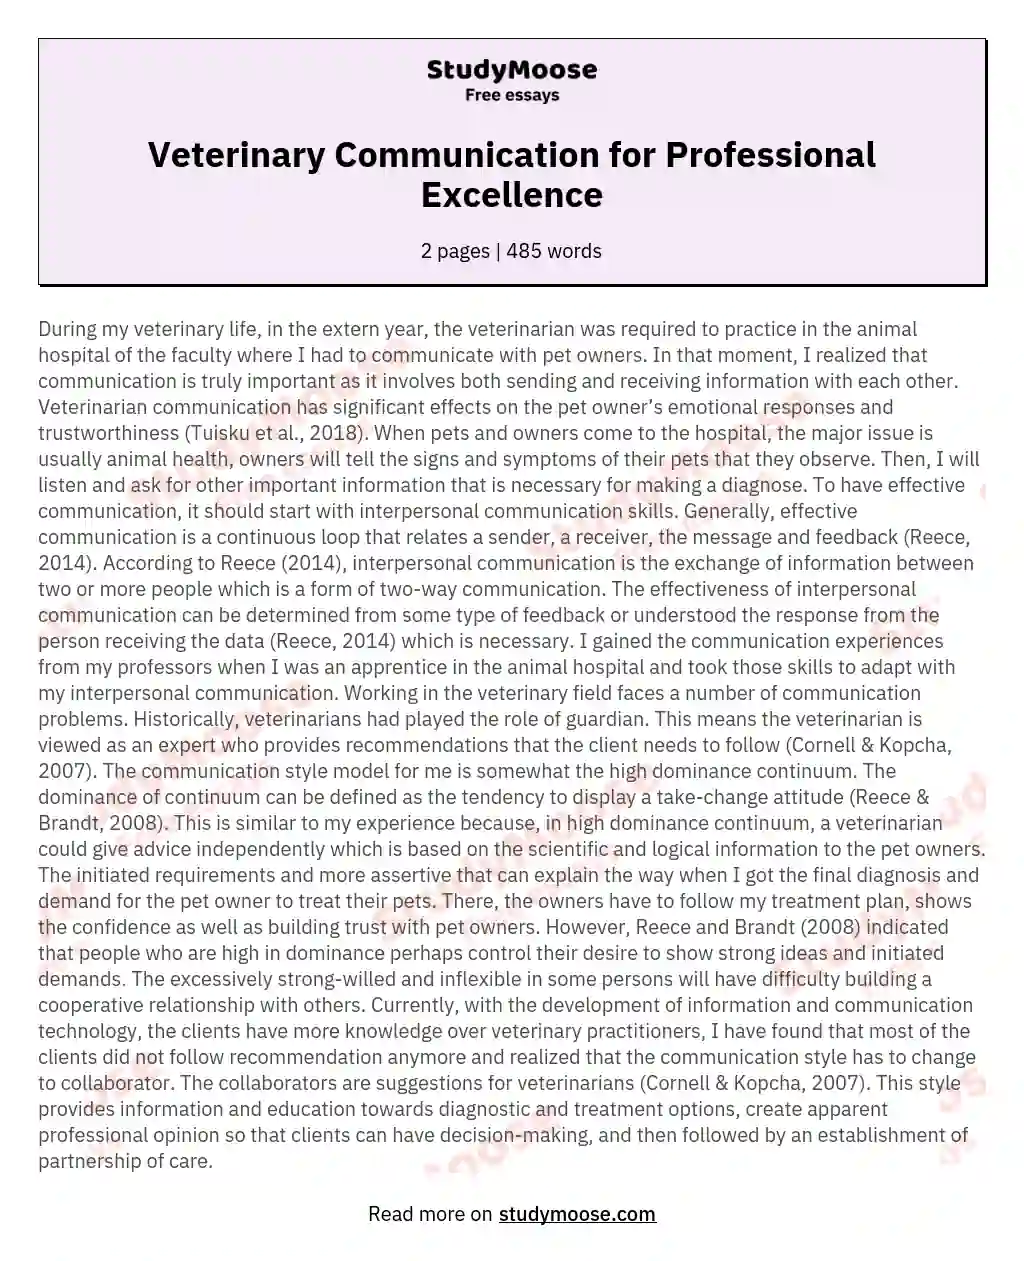 Veterinary Communication for Professional Excellence essay